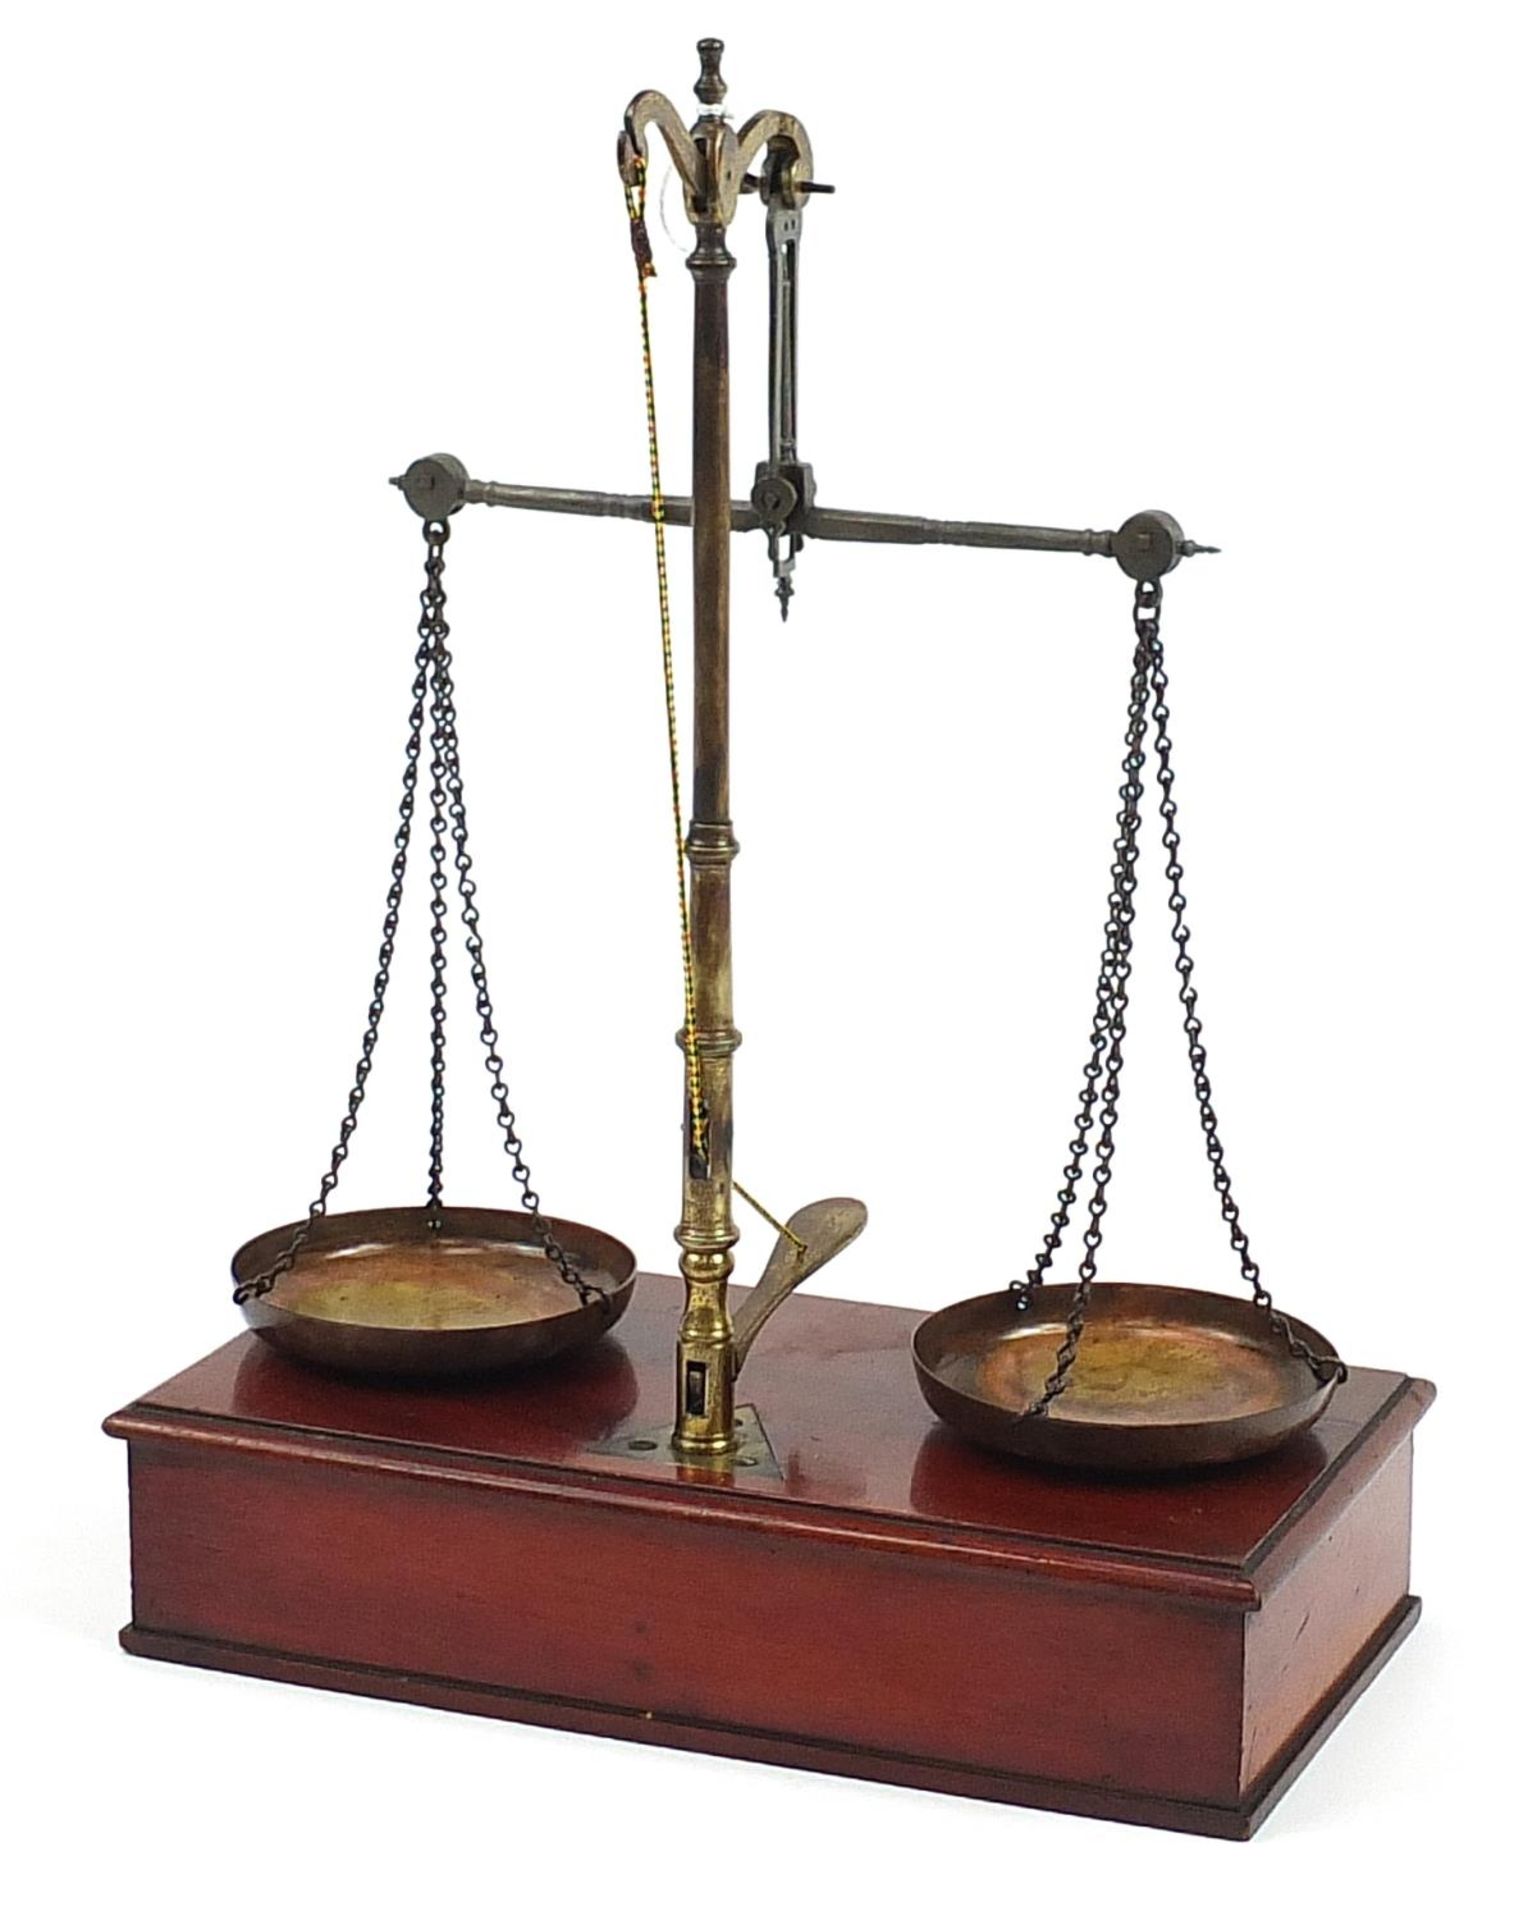 Set of Victorian mahogany and brass postage scales by Fanner & Co of London, 39.5cm high - Image 5 of 5